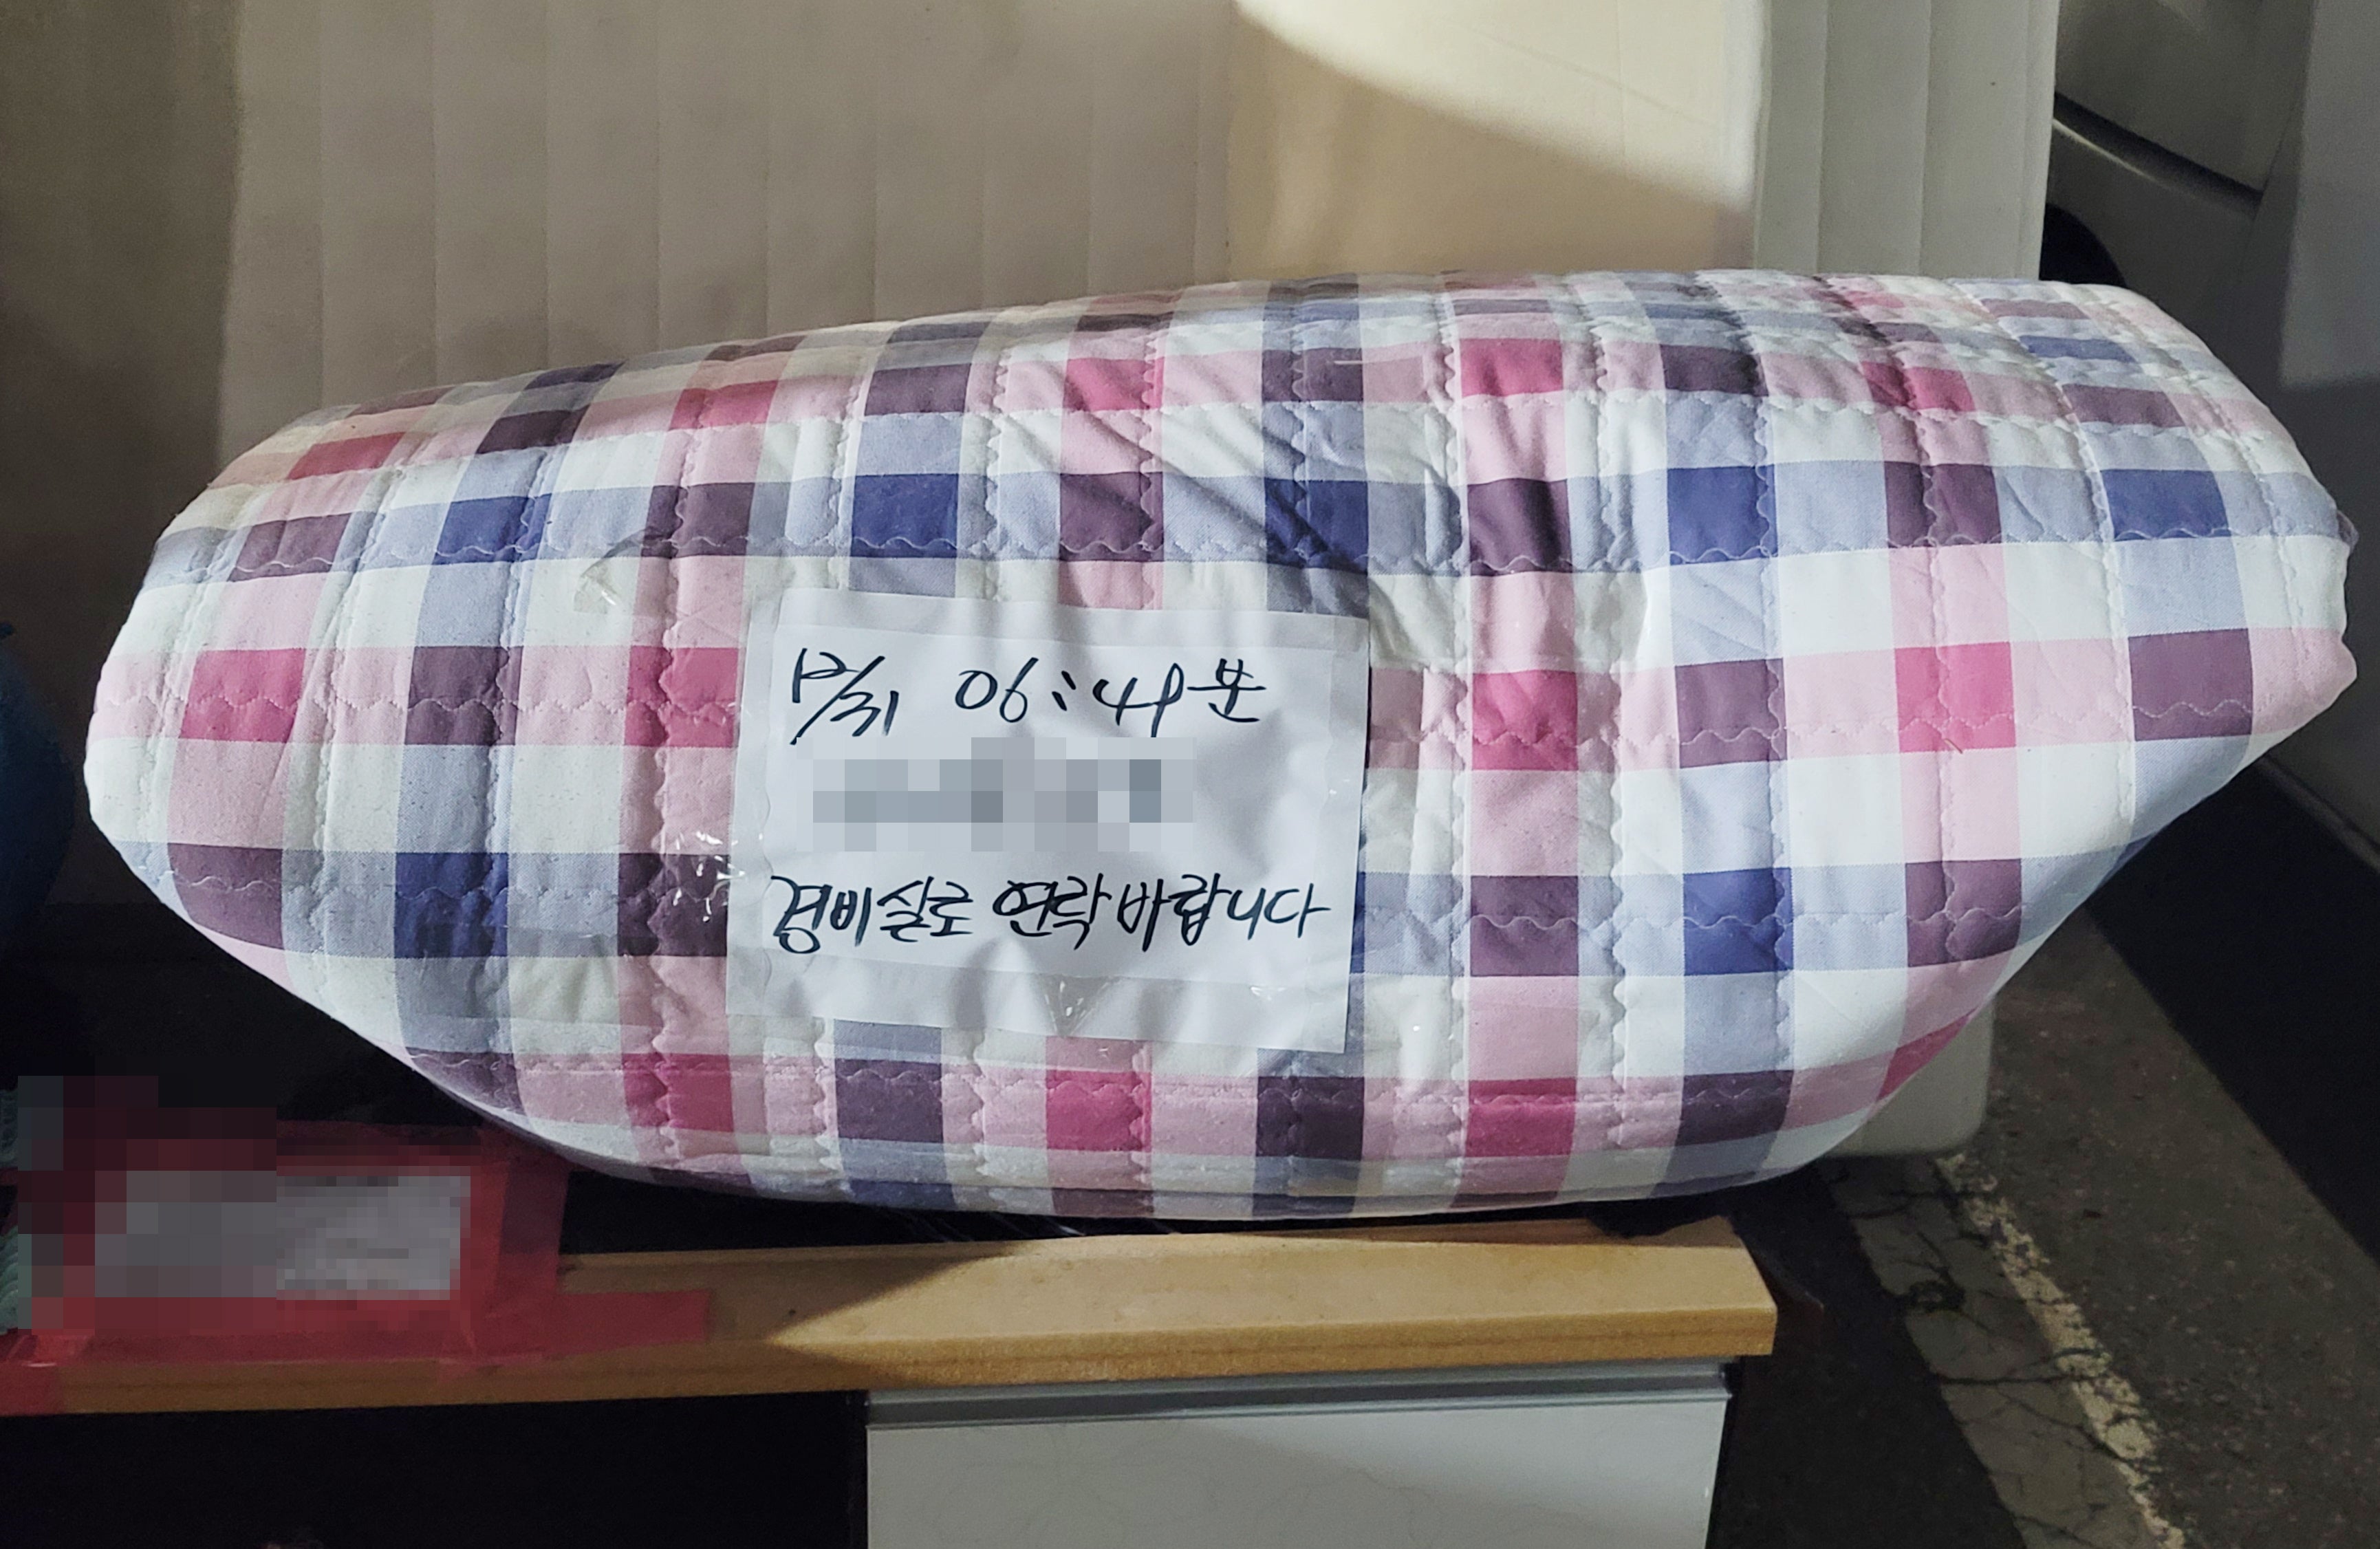 A piece of folded bedding of the North Korean defector